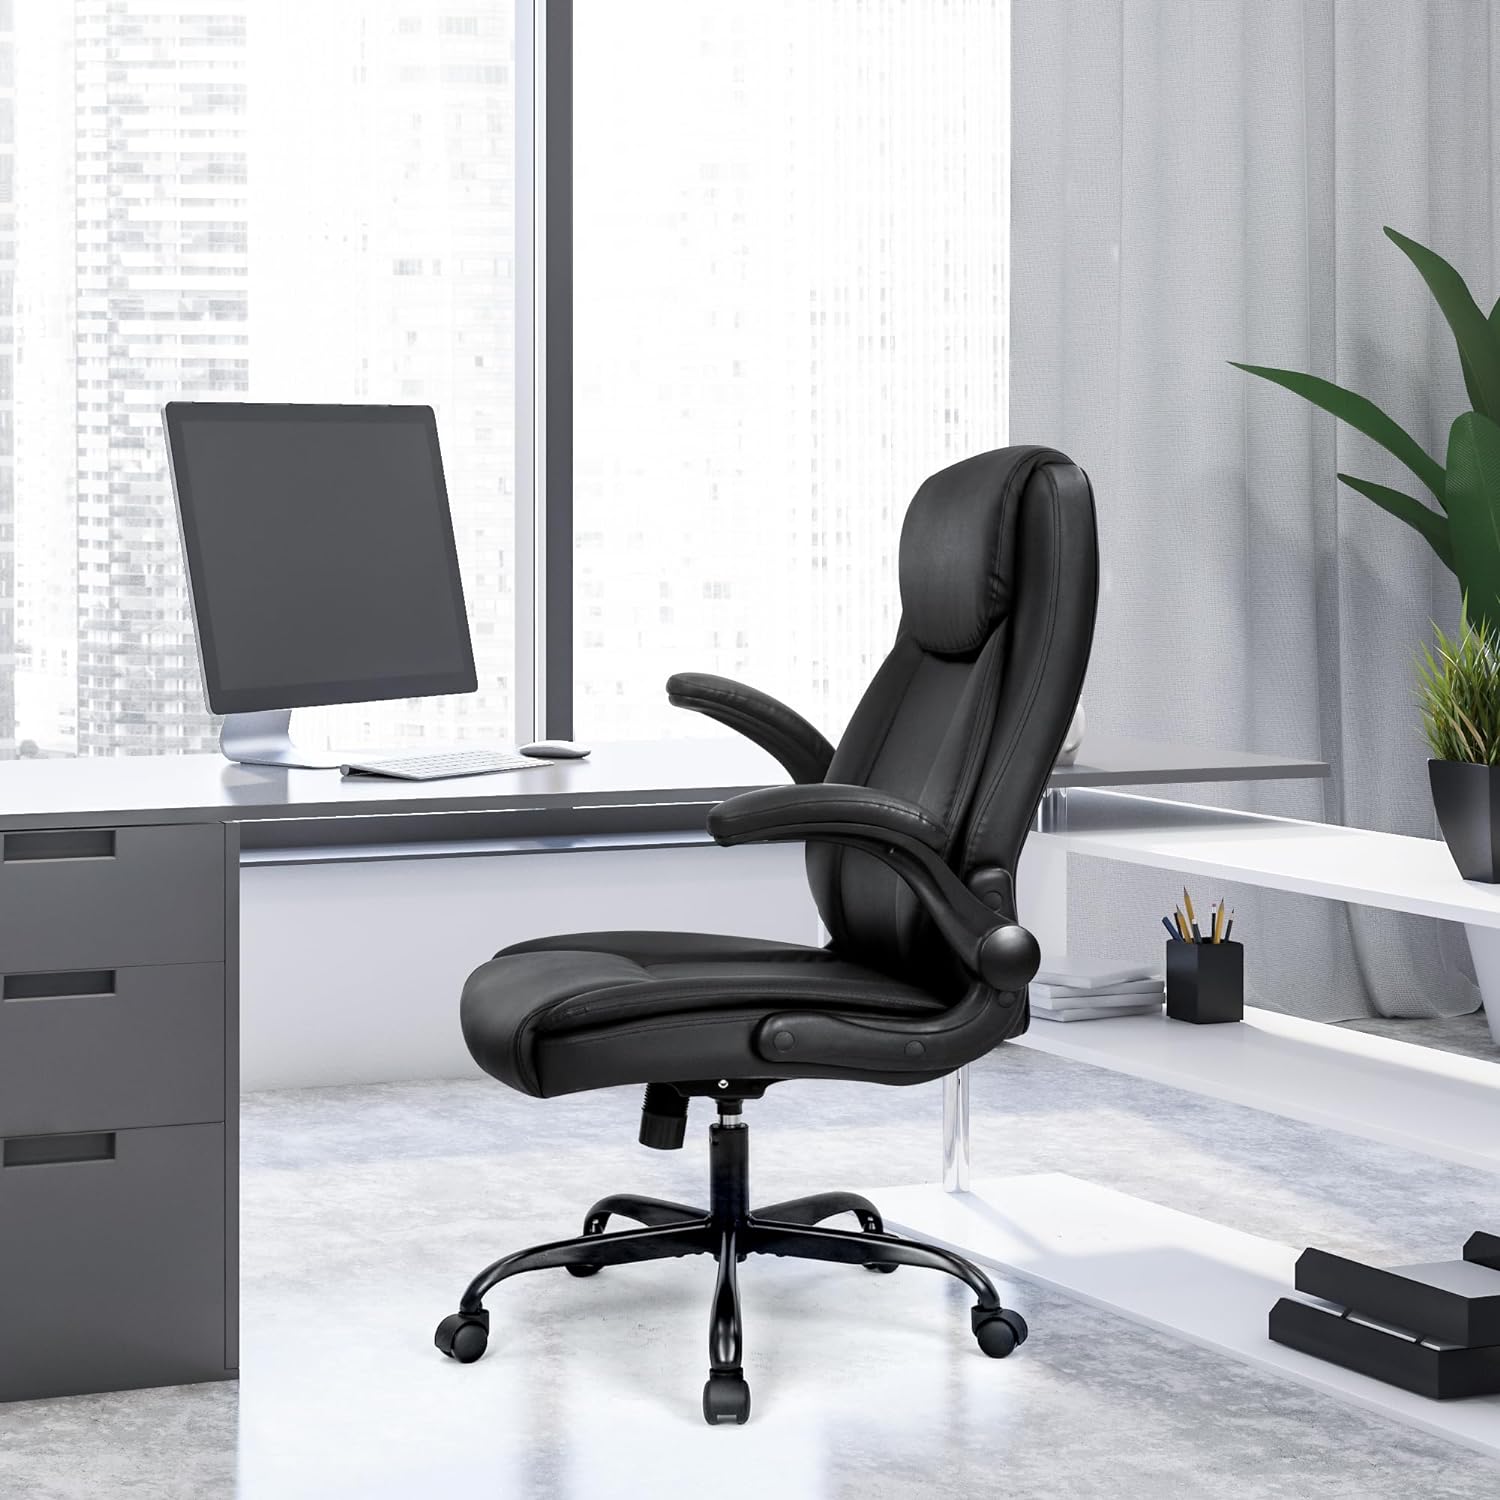 NEO CHAIR Ergonomic Office Chair PU Leather Executive Padded Flip Up Armrest Computer Chair